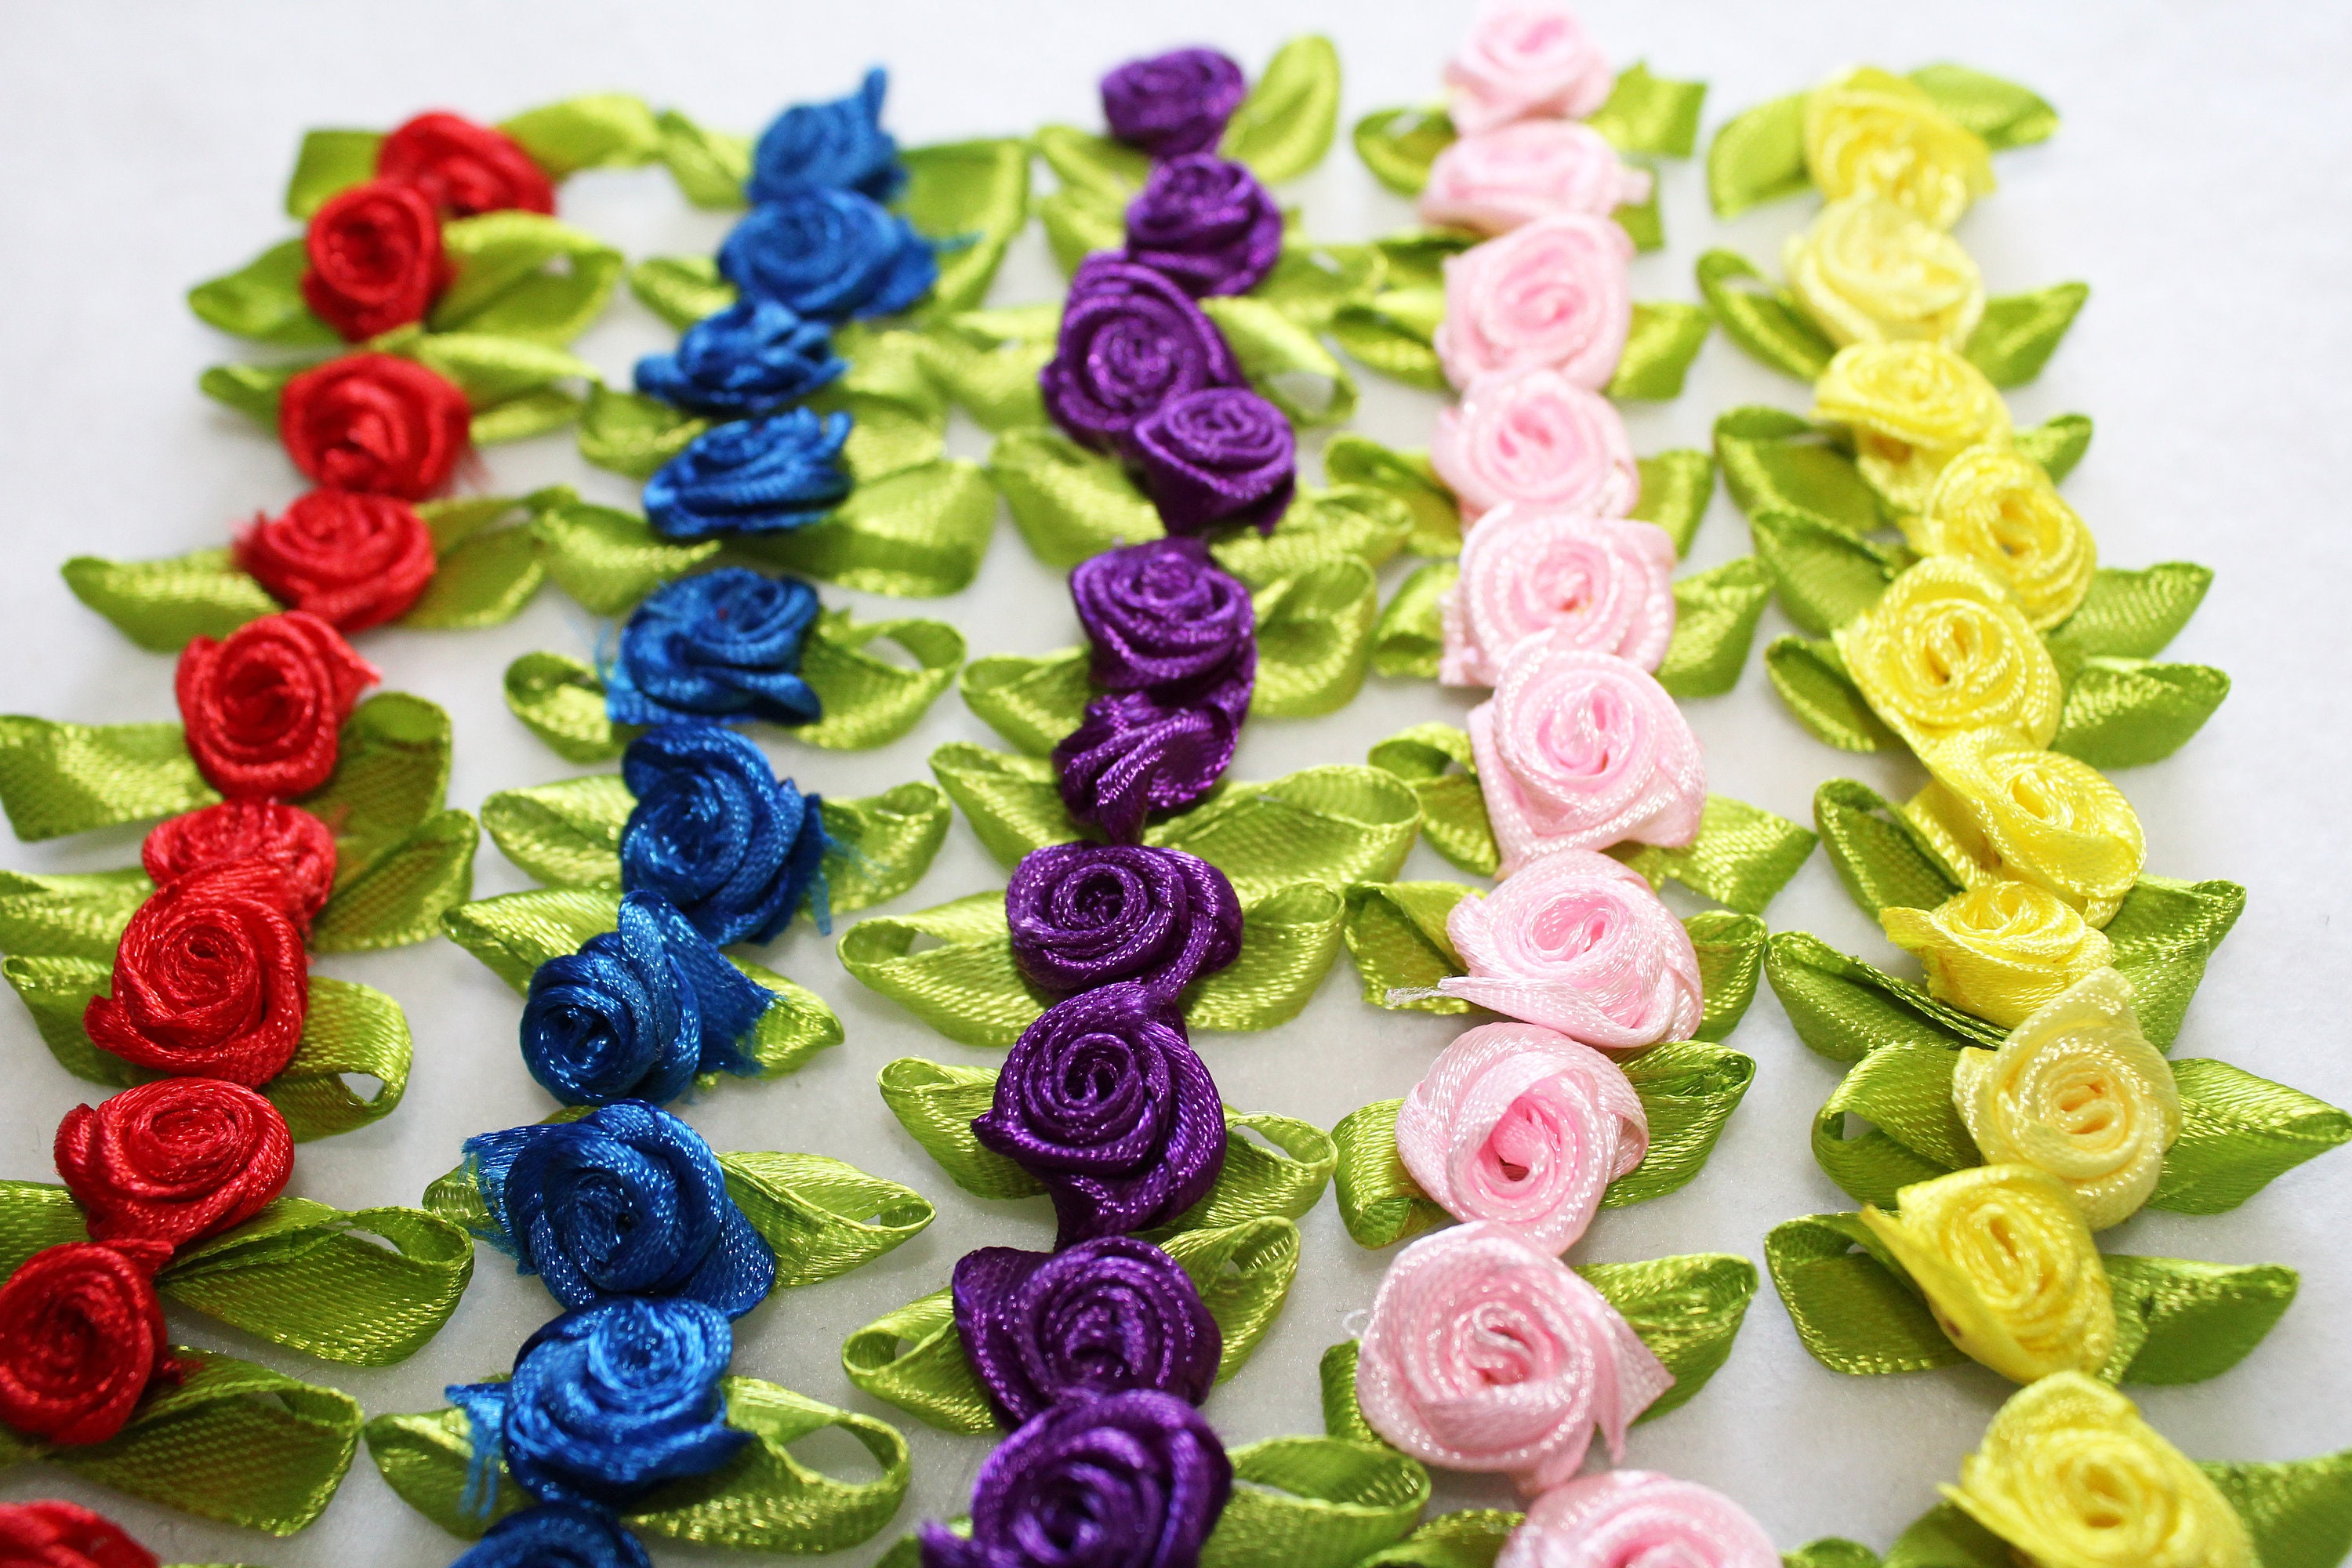  Mini Ribbon Roses for Crafts, BENBO 200Pcs Tiny Artificial  Fabric Flowers with Leaves Small Rosettes Applique DIY Flower Satin Ribbon  Roses for Sewing Bows Wedding Festival Decor, 10 Colors